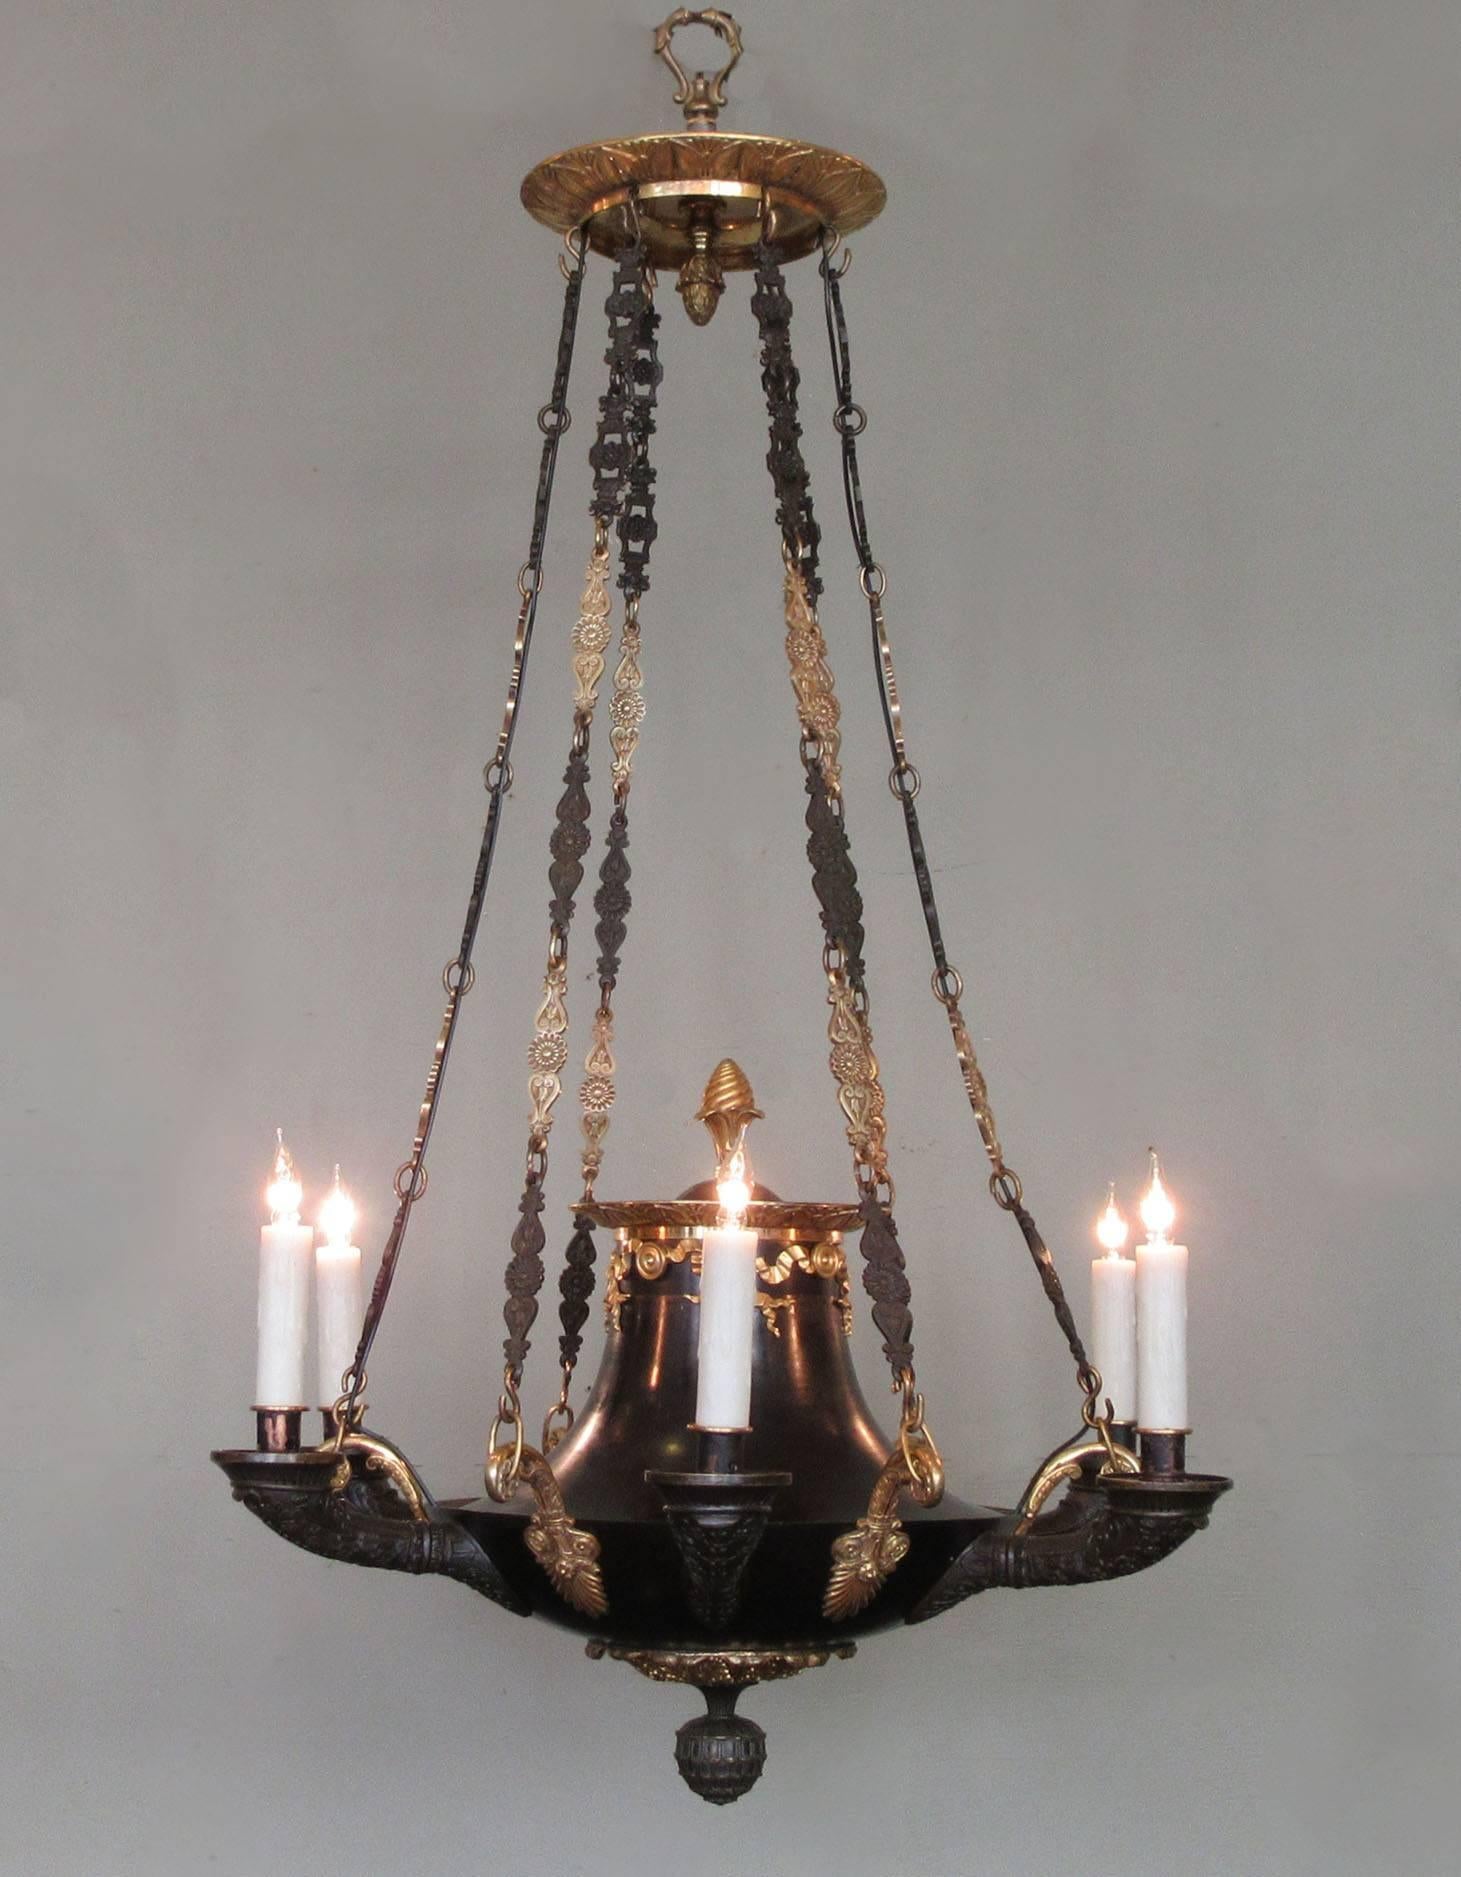 A very fine English Regency Argand (oil lamp) chandelier, circa 1810, featuring patinated and doré bronze, neoclassical motifs and six candle bulbs. The chandelier has been recently rewired with new porcelain sockets.